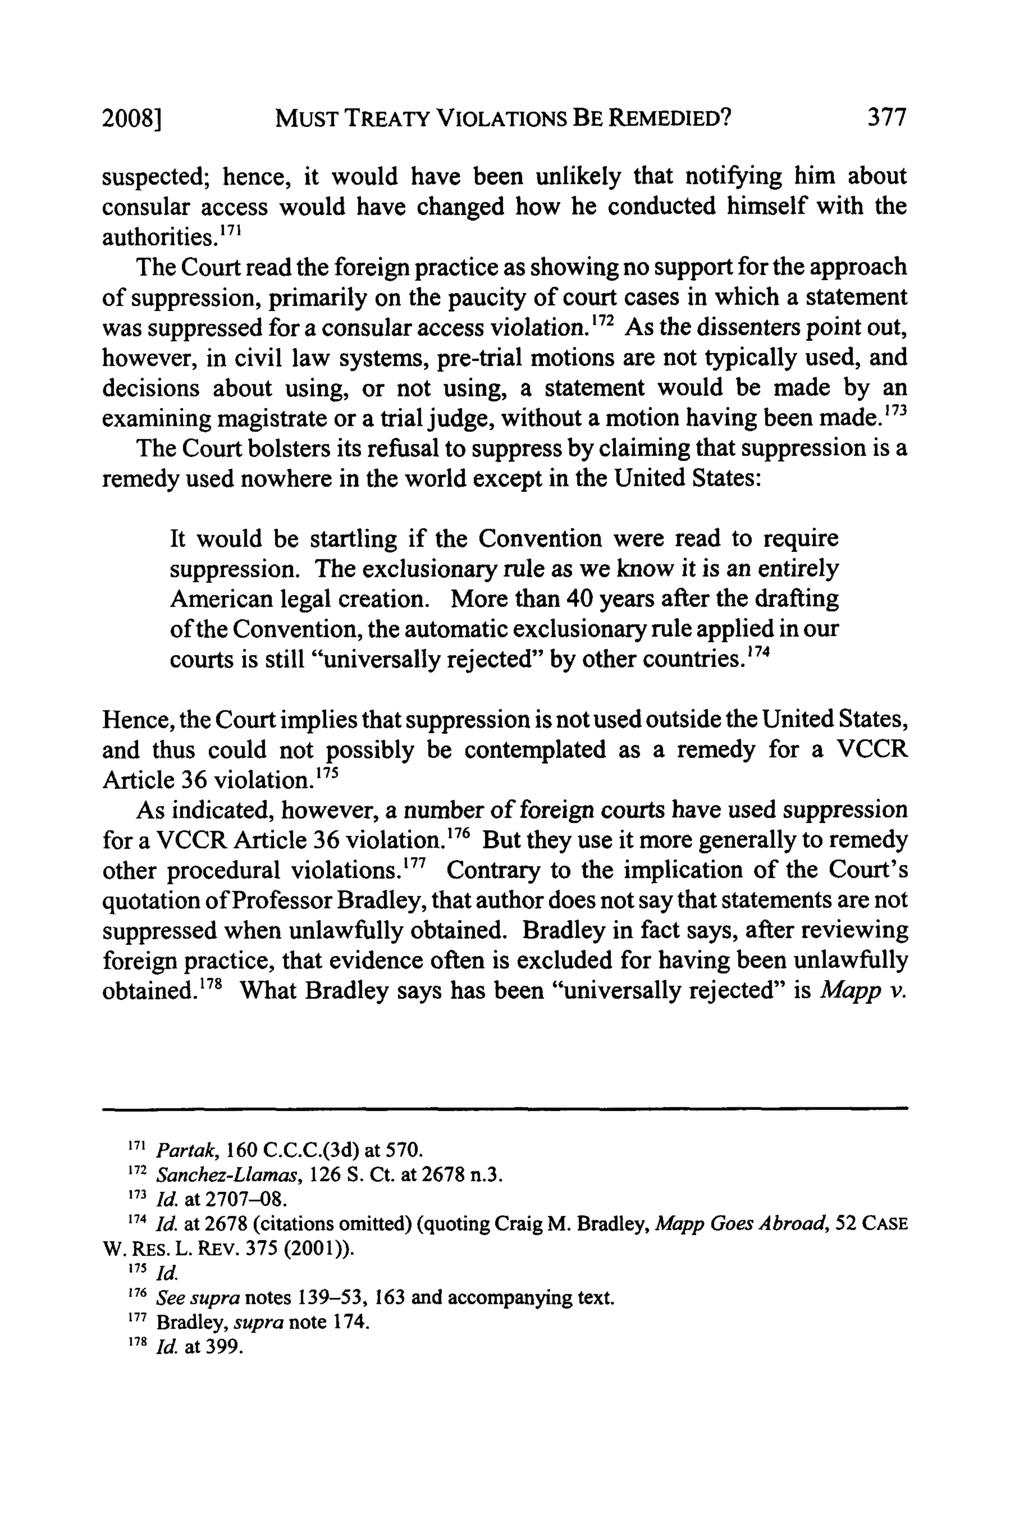 2008] MUST TREATY VIOLATIONS BE REMEDIED? suspected; hence, it would have been unlikely that notifying him about consular access would have changed how he conducted himself with the authorities.